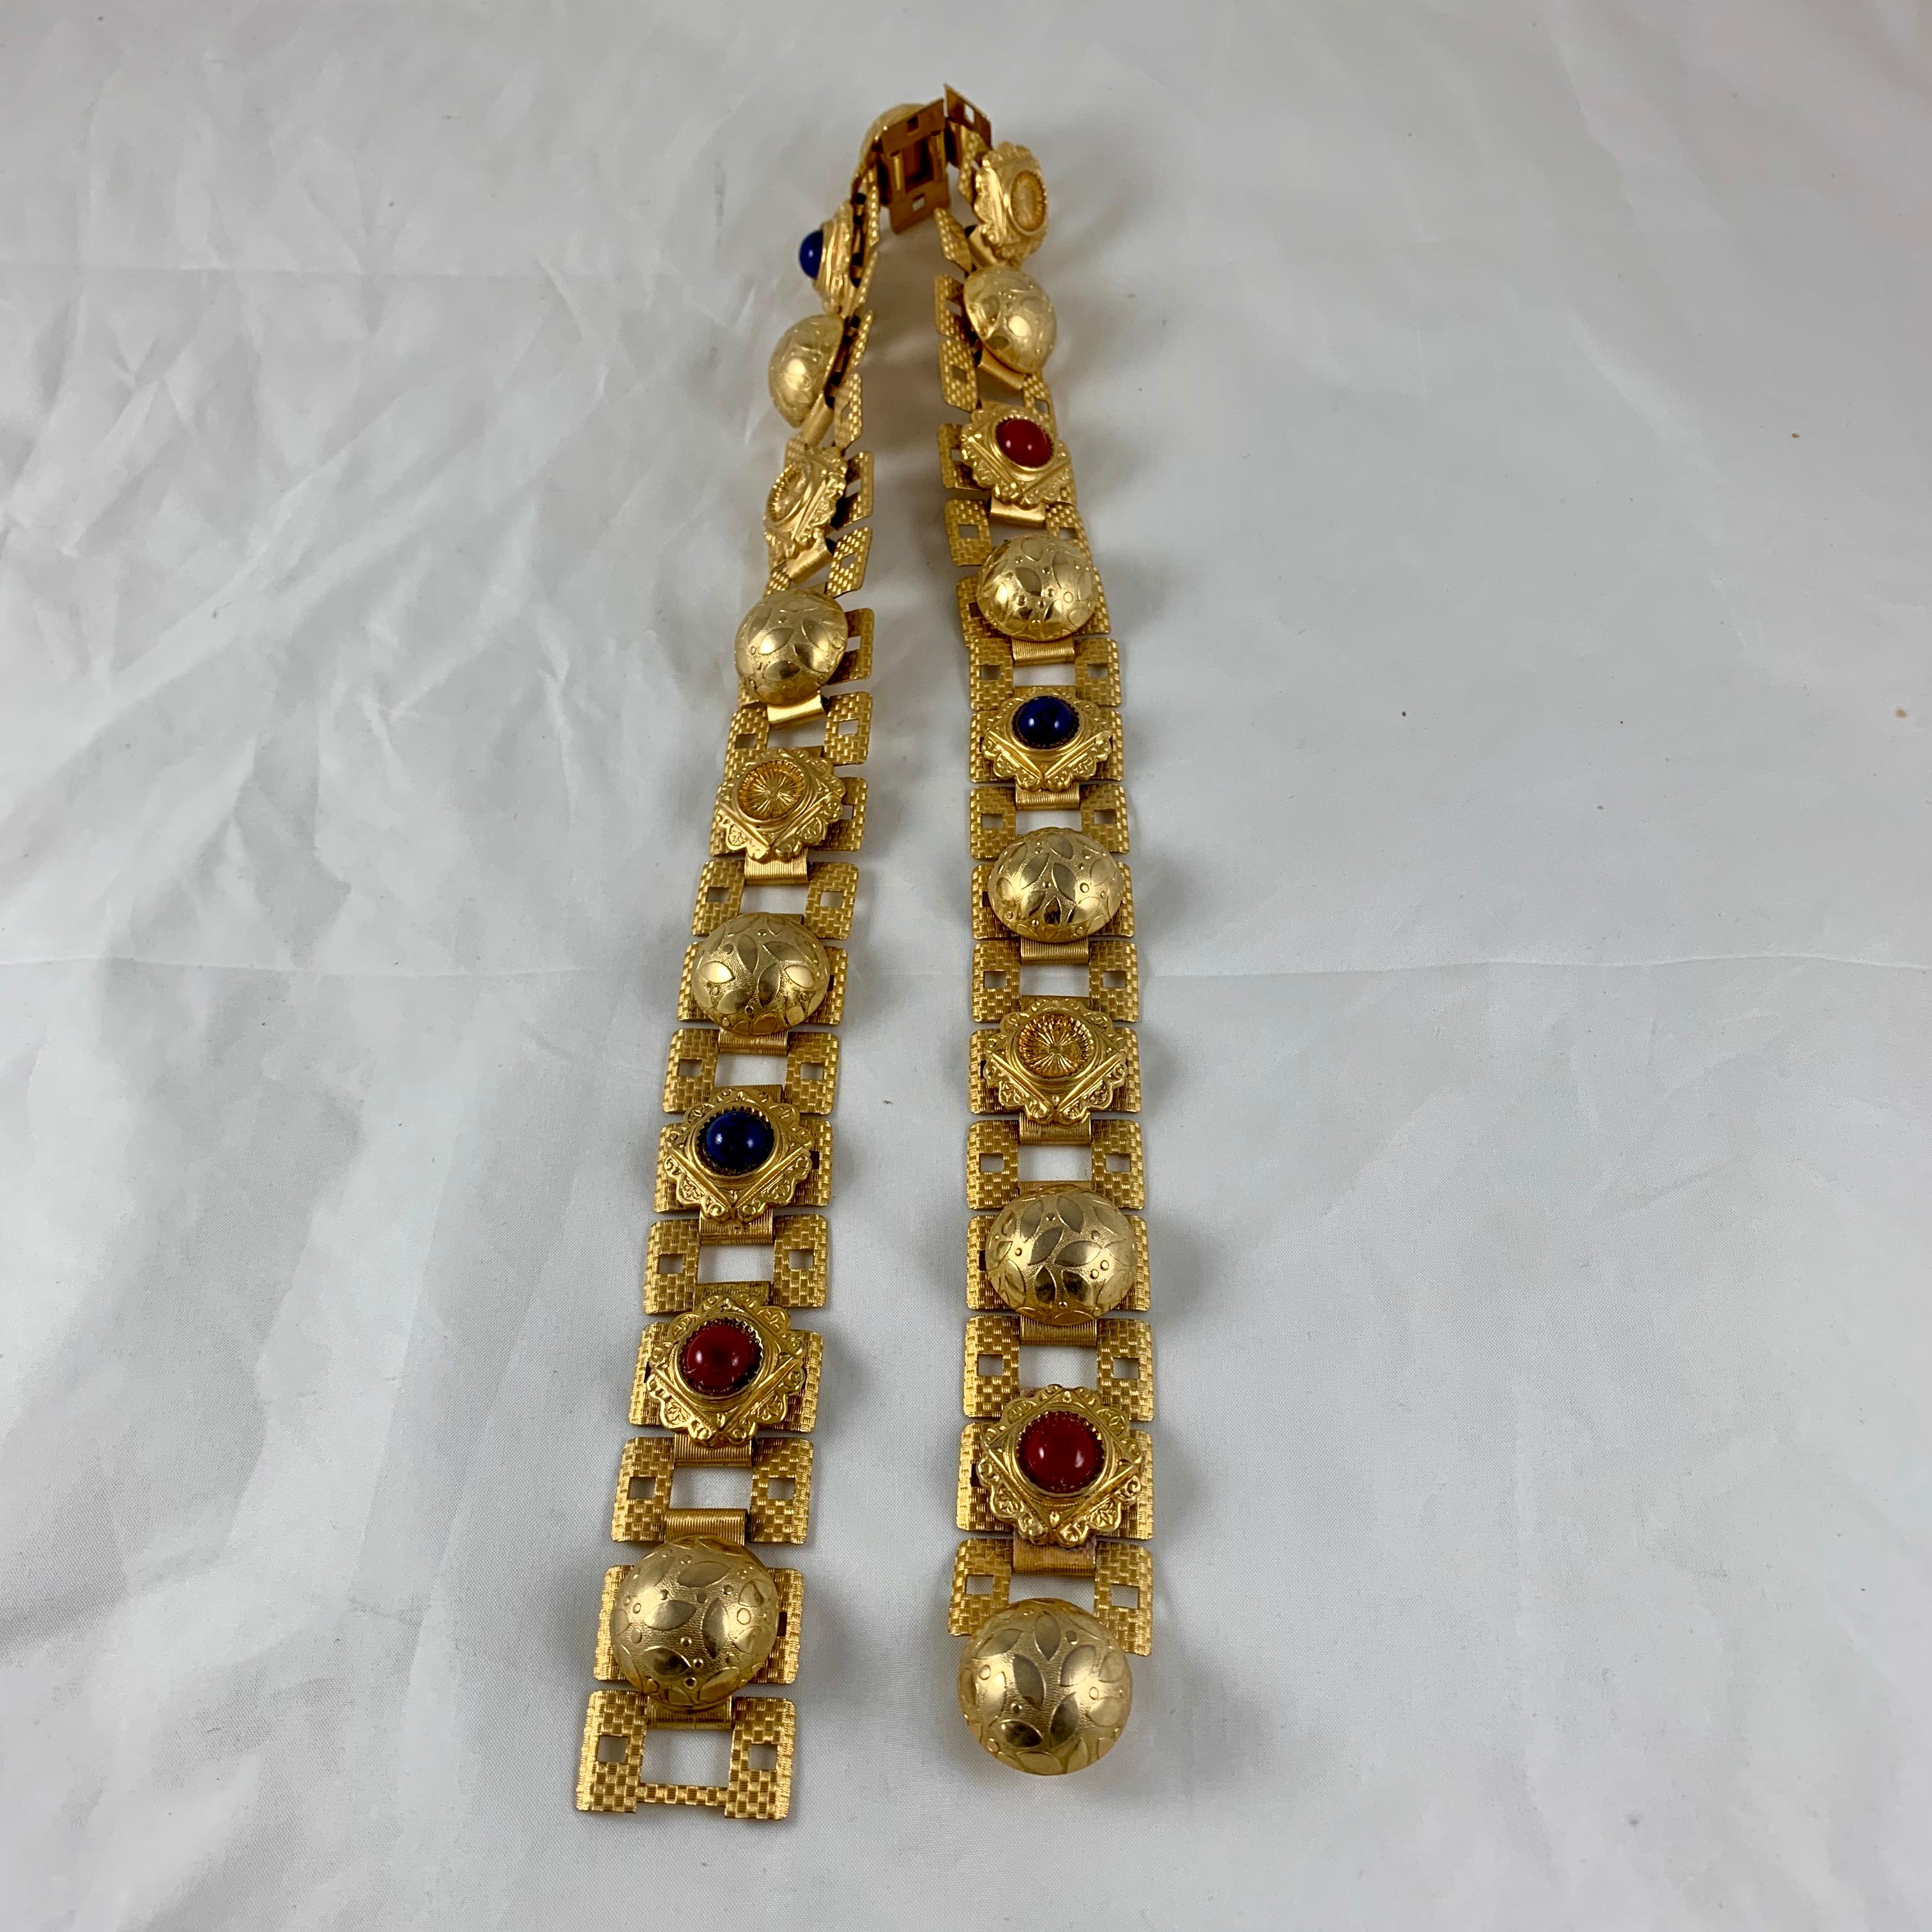 From Paris, France, a 1960s Era belt made of gold-tone metal rectangular links with applied medallions, and bakelite 'jewels'. Unusual and impactful! Heavy and very well made.

Assembled by hand, the links show an impressed, cross-hatched textured